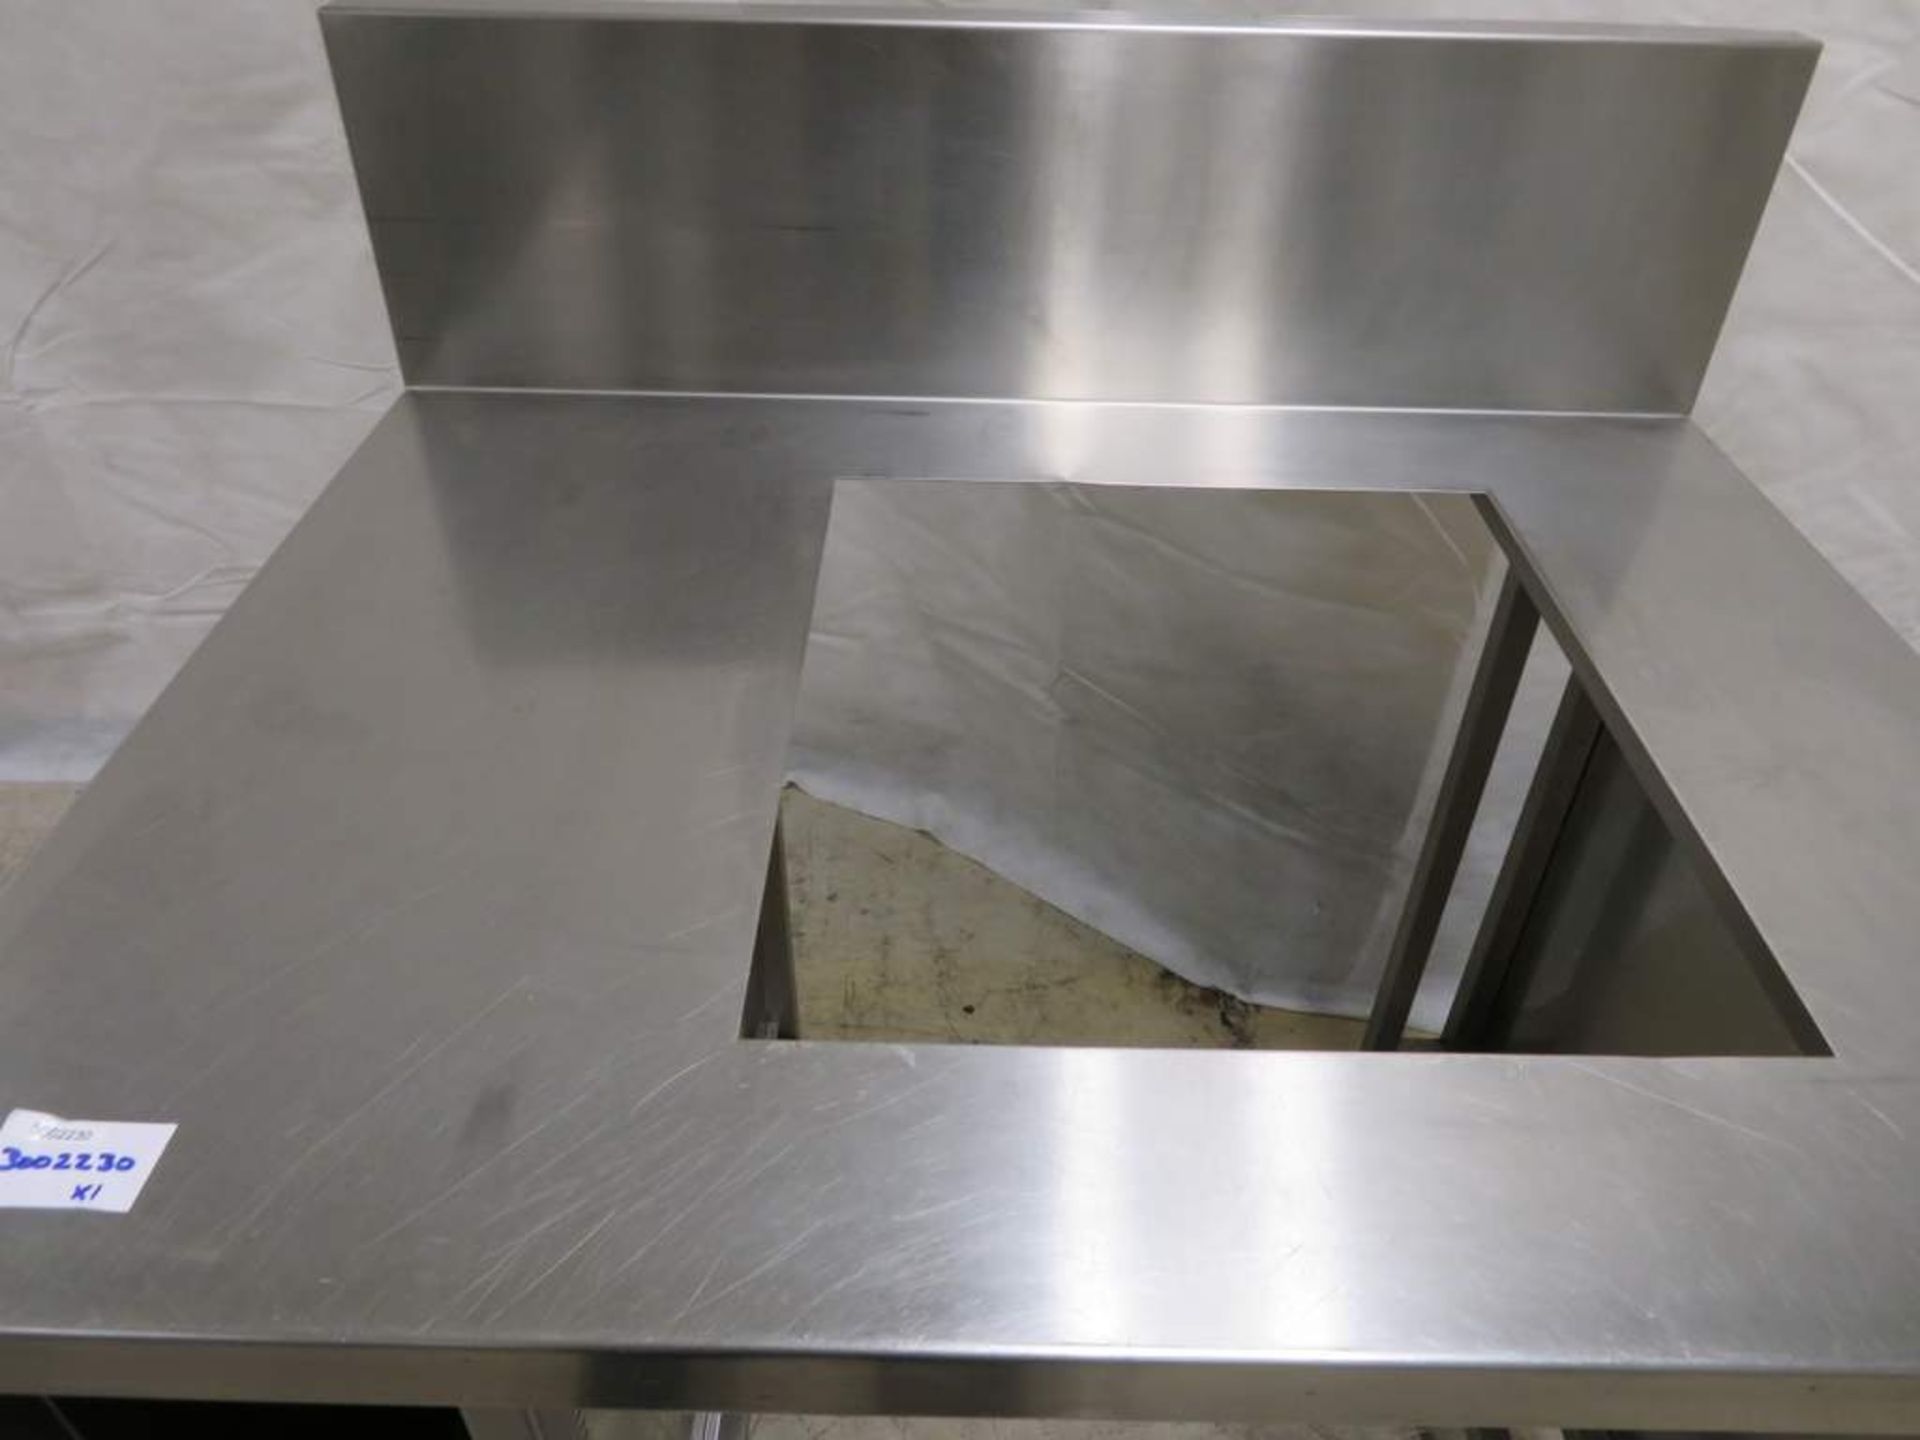 Stainless Steel Preperation Table - Image 5 of 6